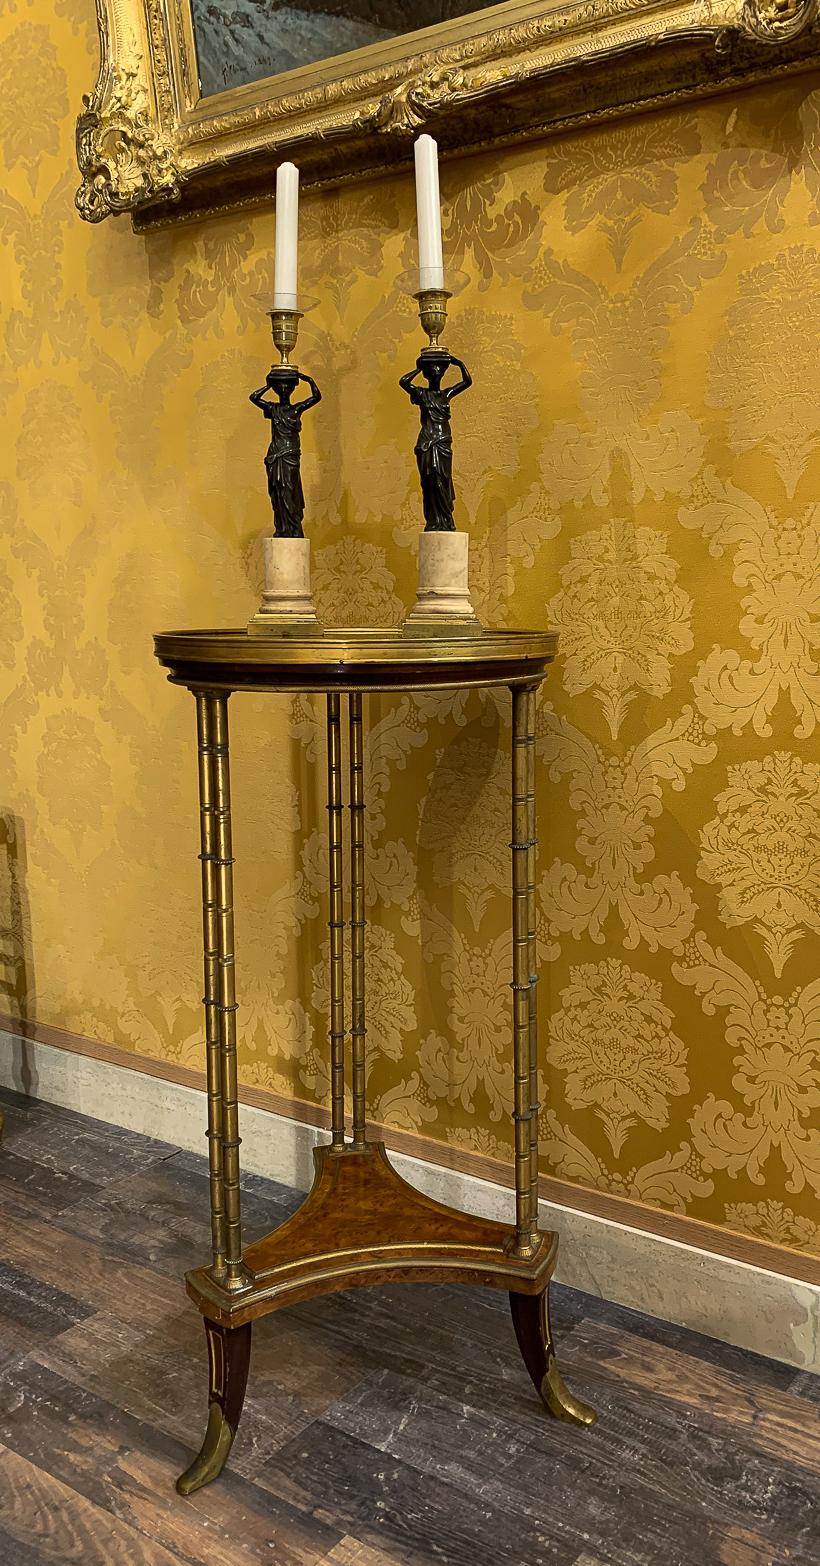 Late 19th century gueridon table in the style of Adam Weisweiler. 

Late 19th century, a fine French Louis XVI marble-top and gilt bronze gueridon table. Based on a design by Adam Weisweiler.

Constructed in Grey of Belgium marble, mahogany, and